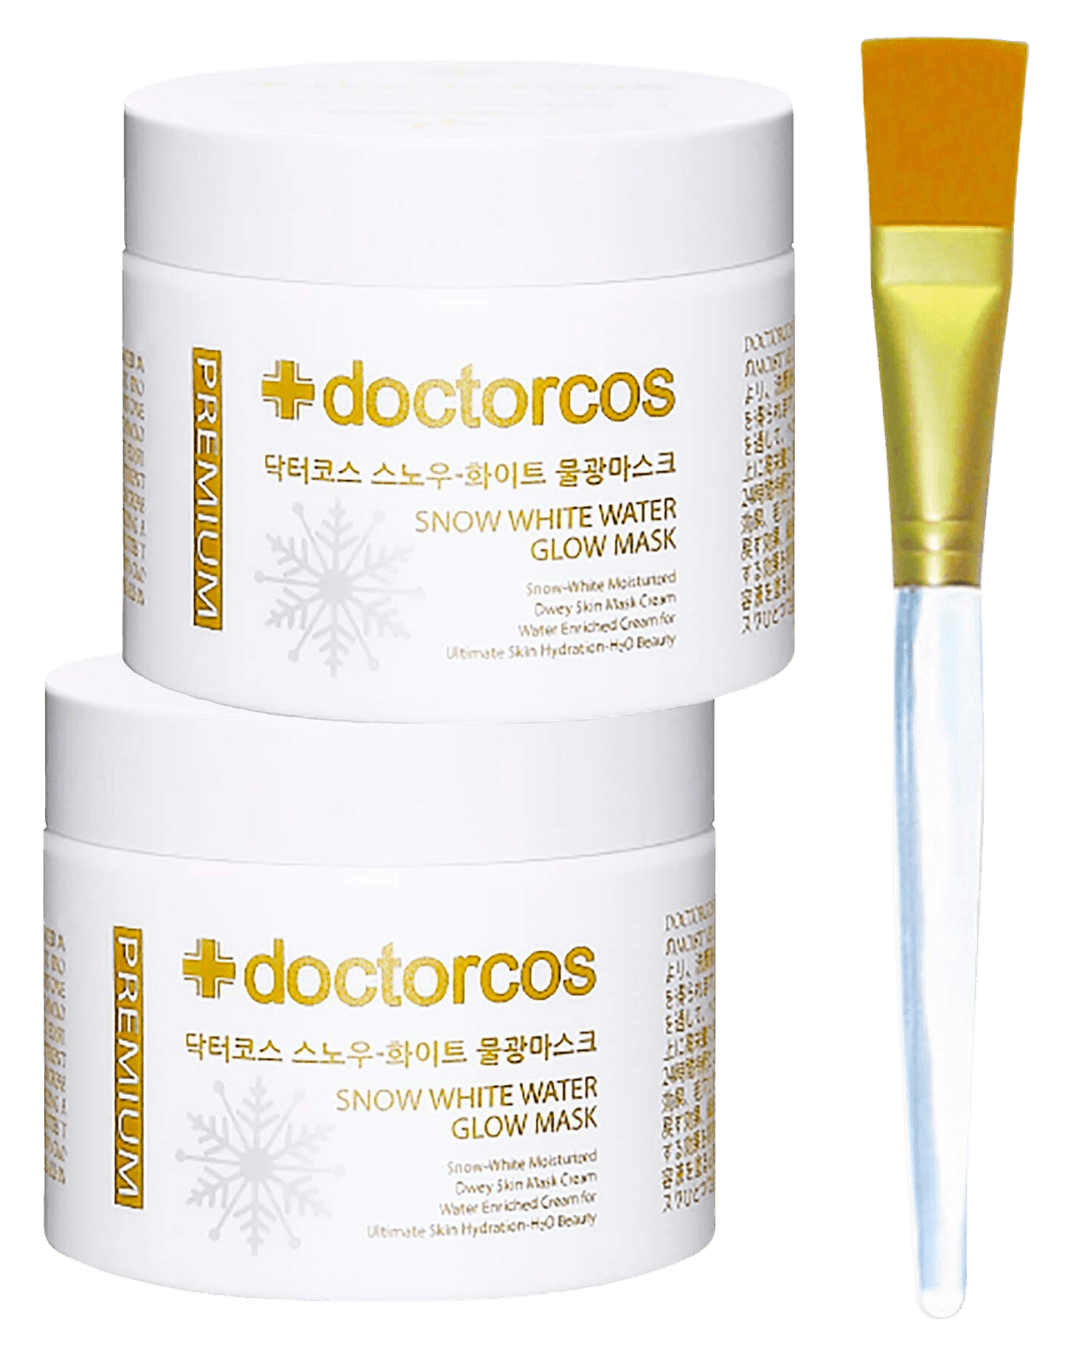 Daily Vanity Beauty Awards 2024 Best Skincare Doctorcos Snow White Water Glow Mask Voted By Beauty Experts